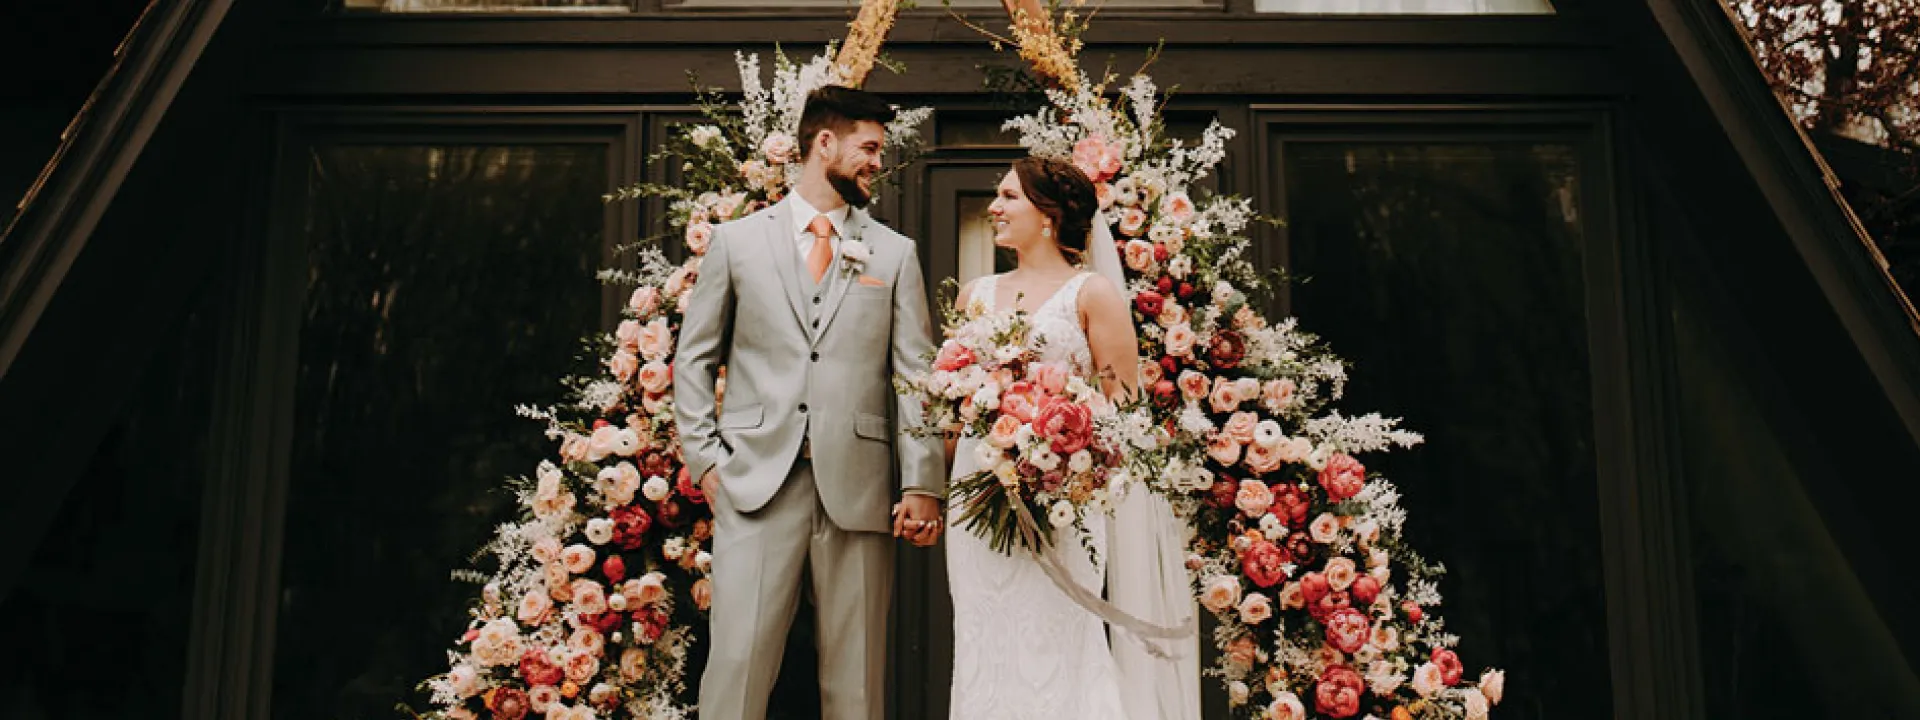 A lush floral arch serves as a ceremony backdrop at Grey Cloud House.